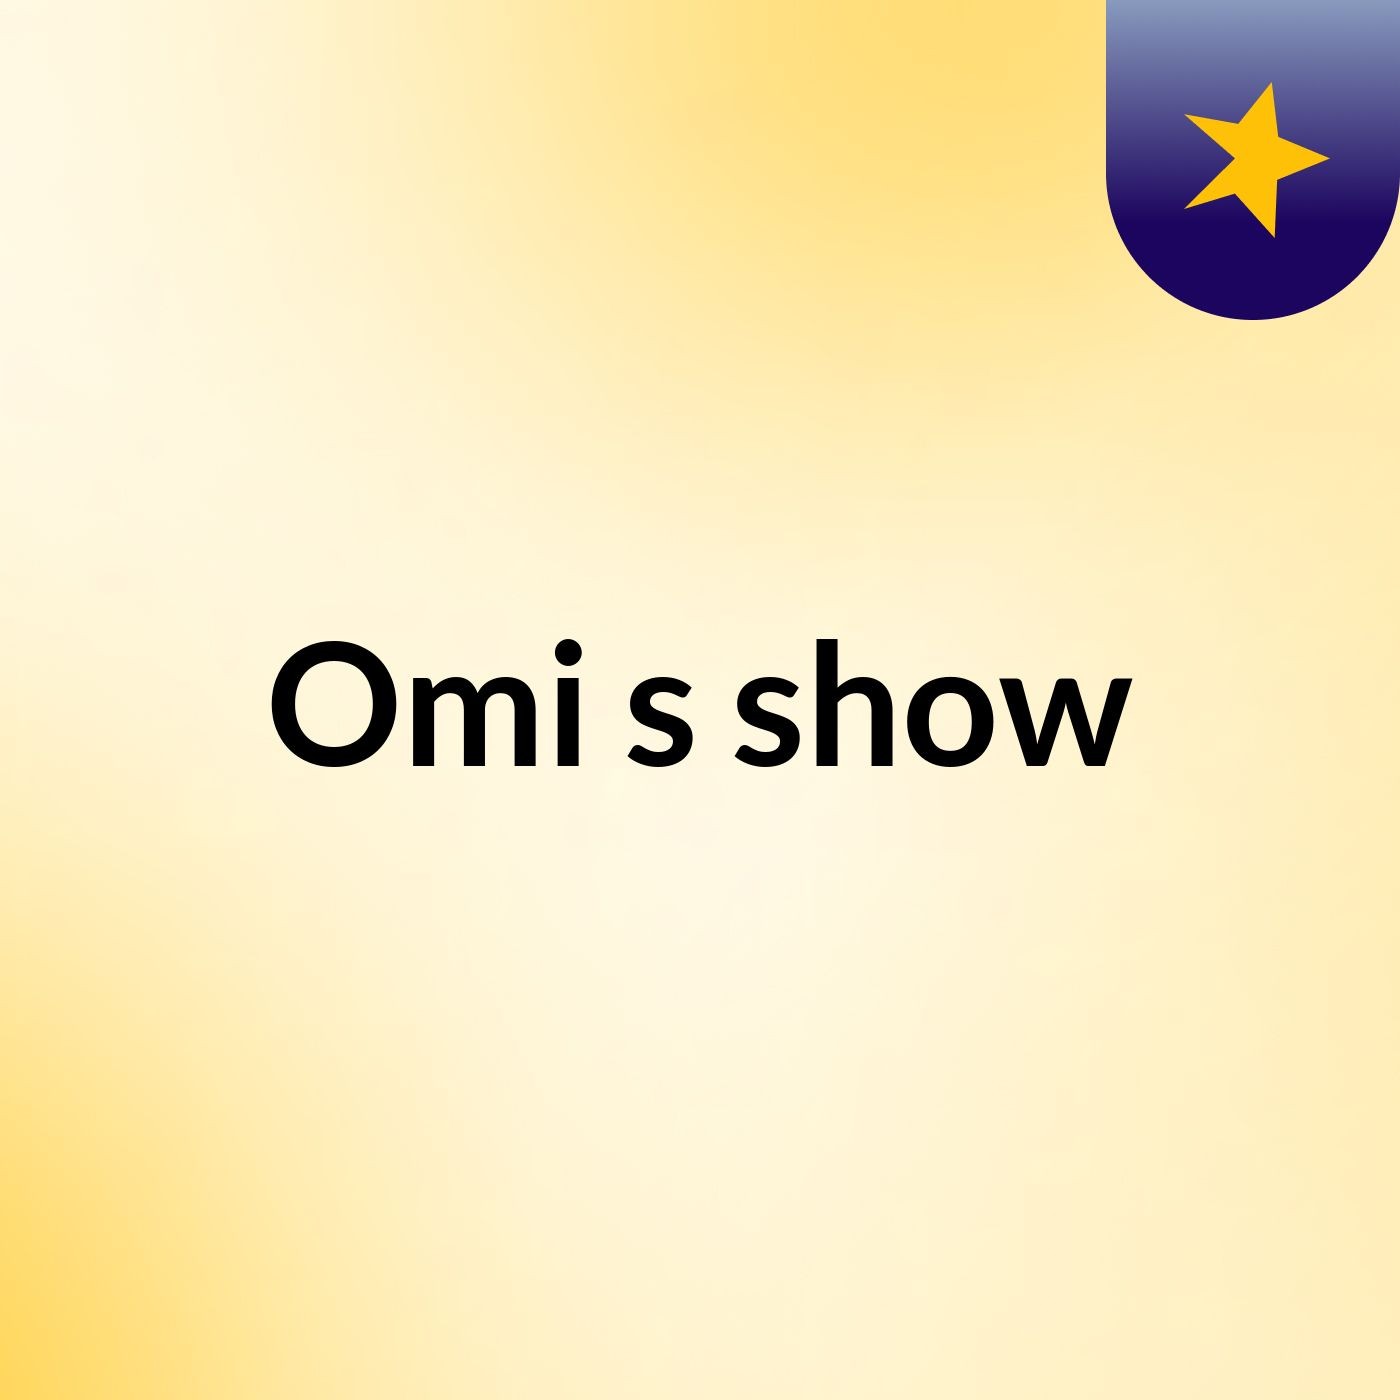 Omi's show